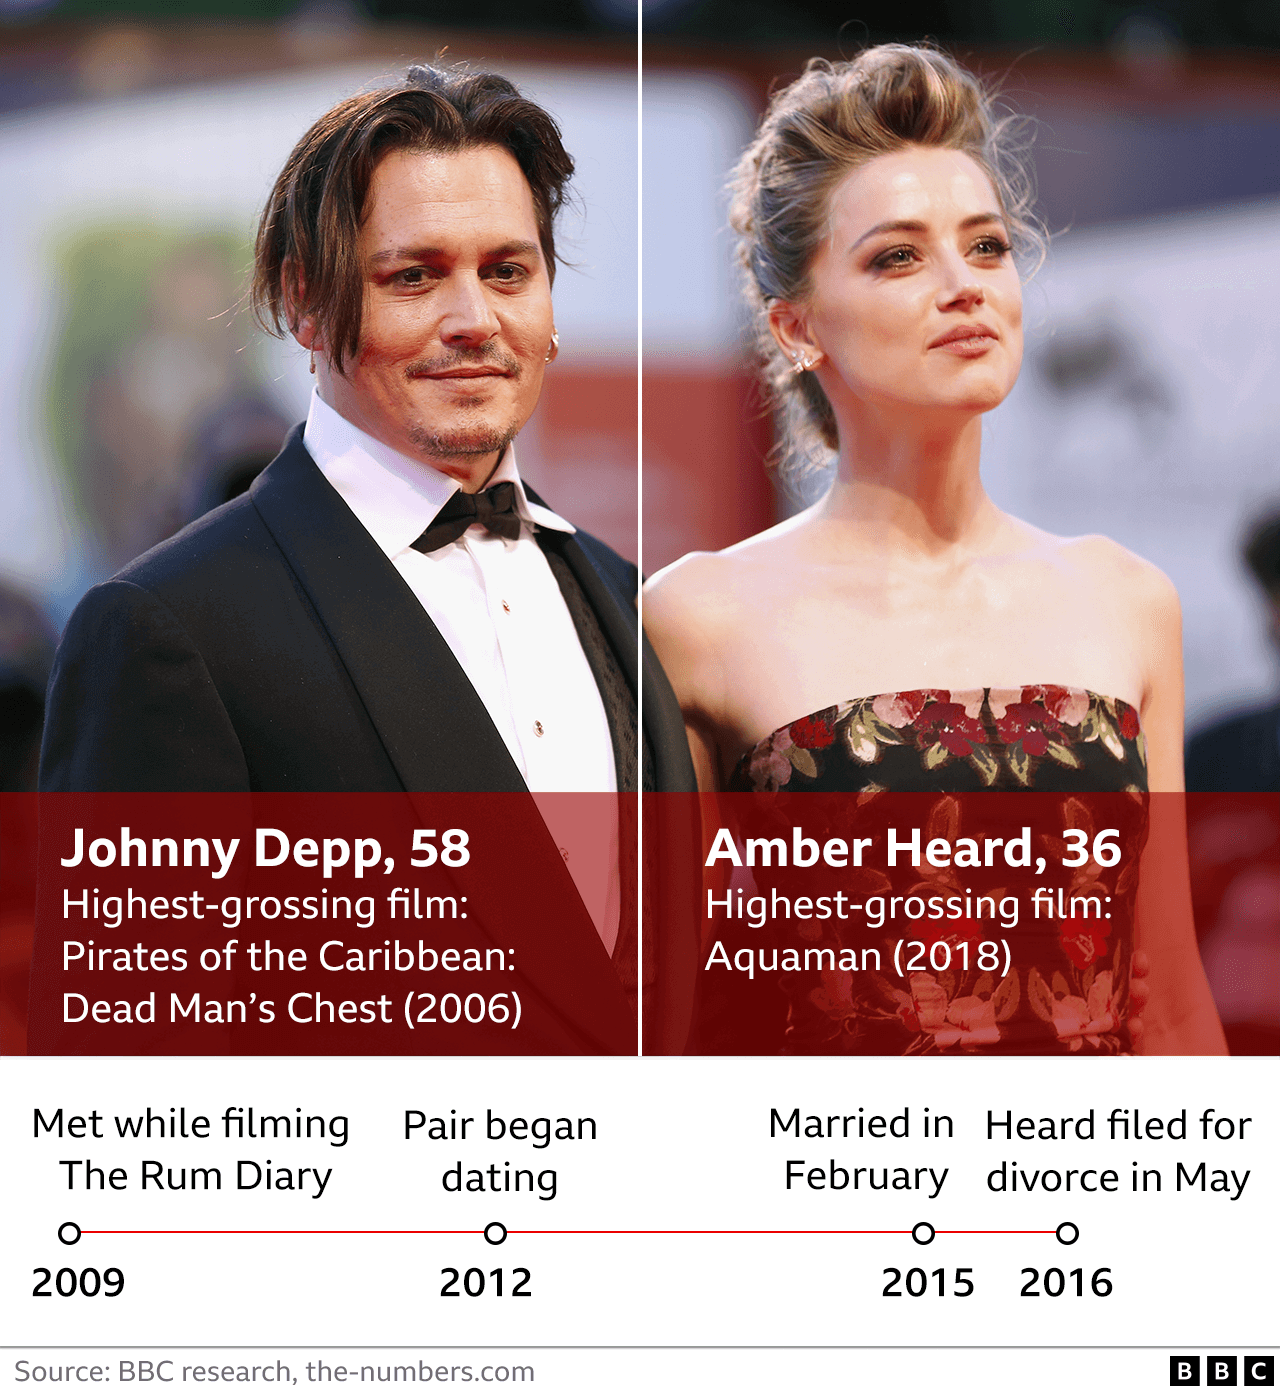 Graphic showing key information about Johnny Depp and Amber Heard